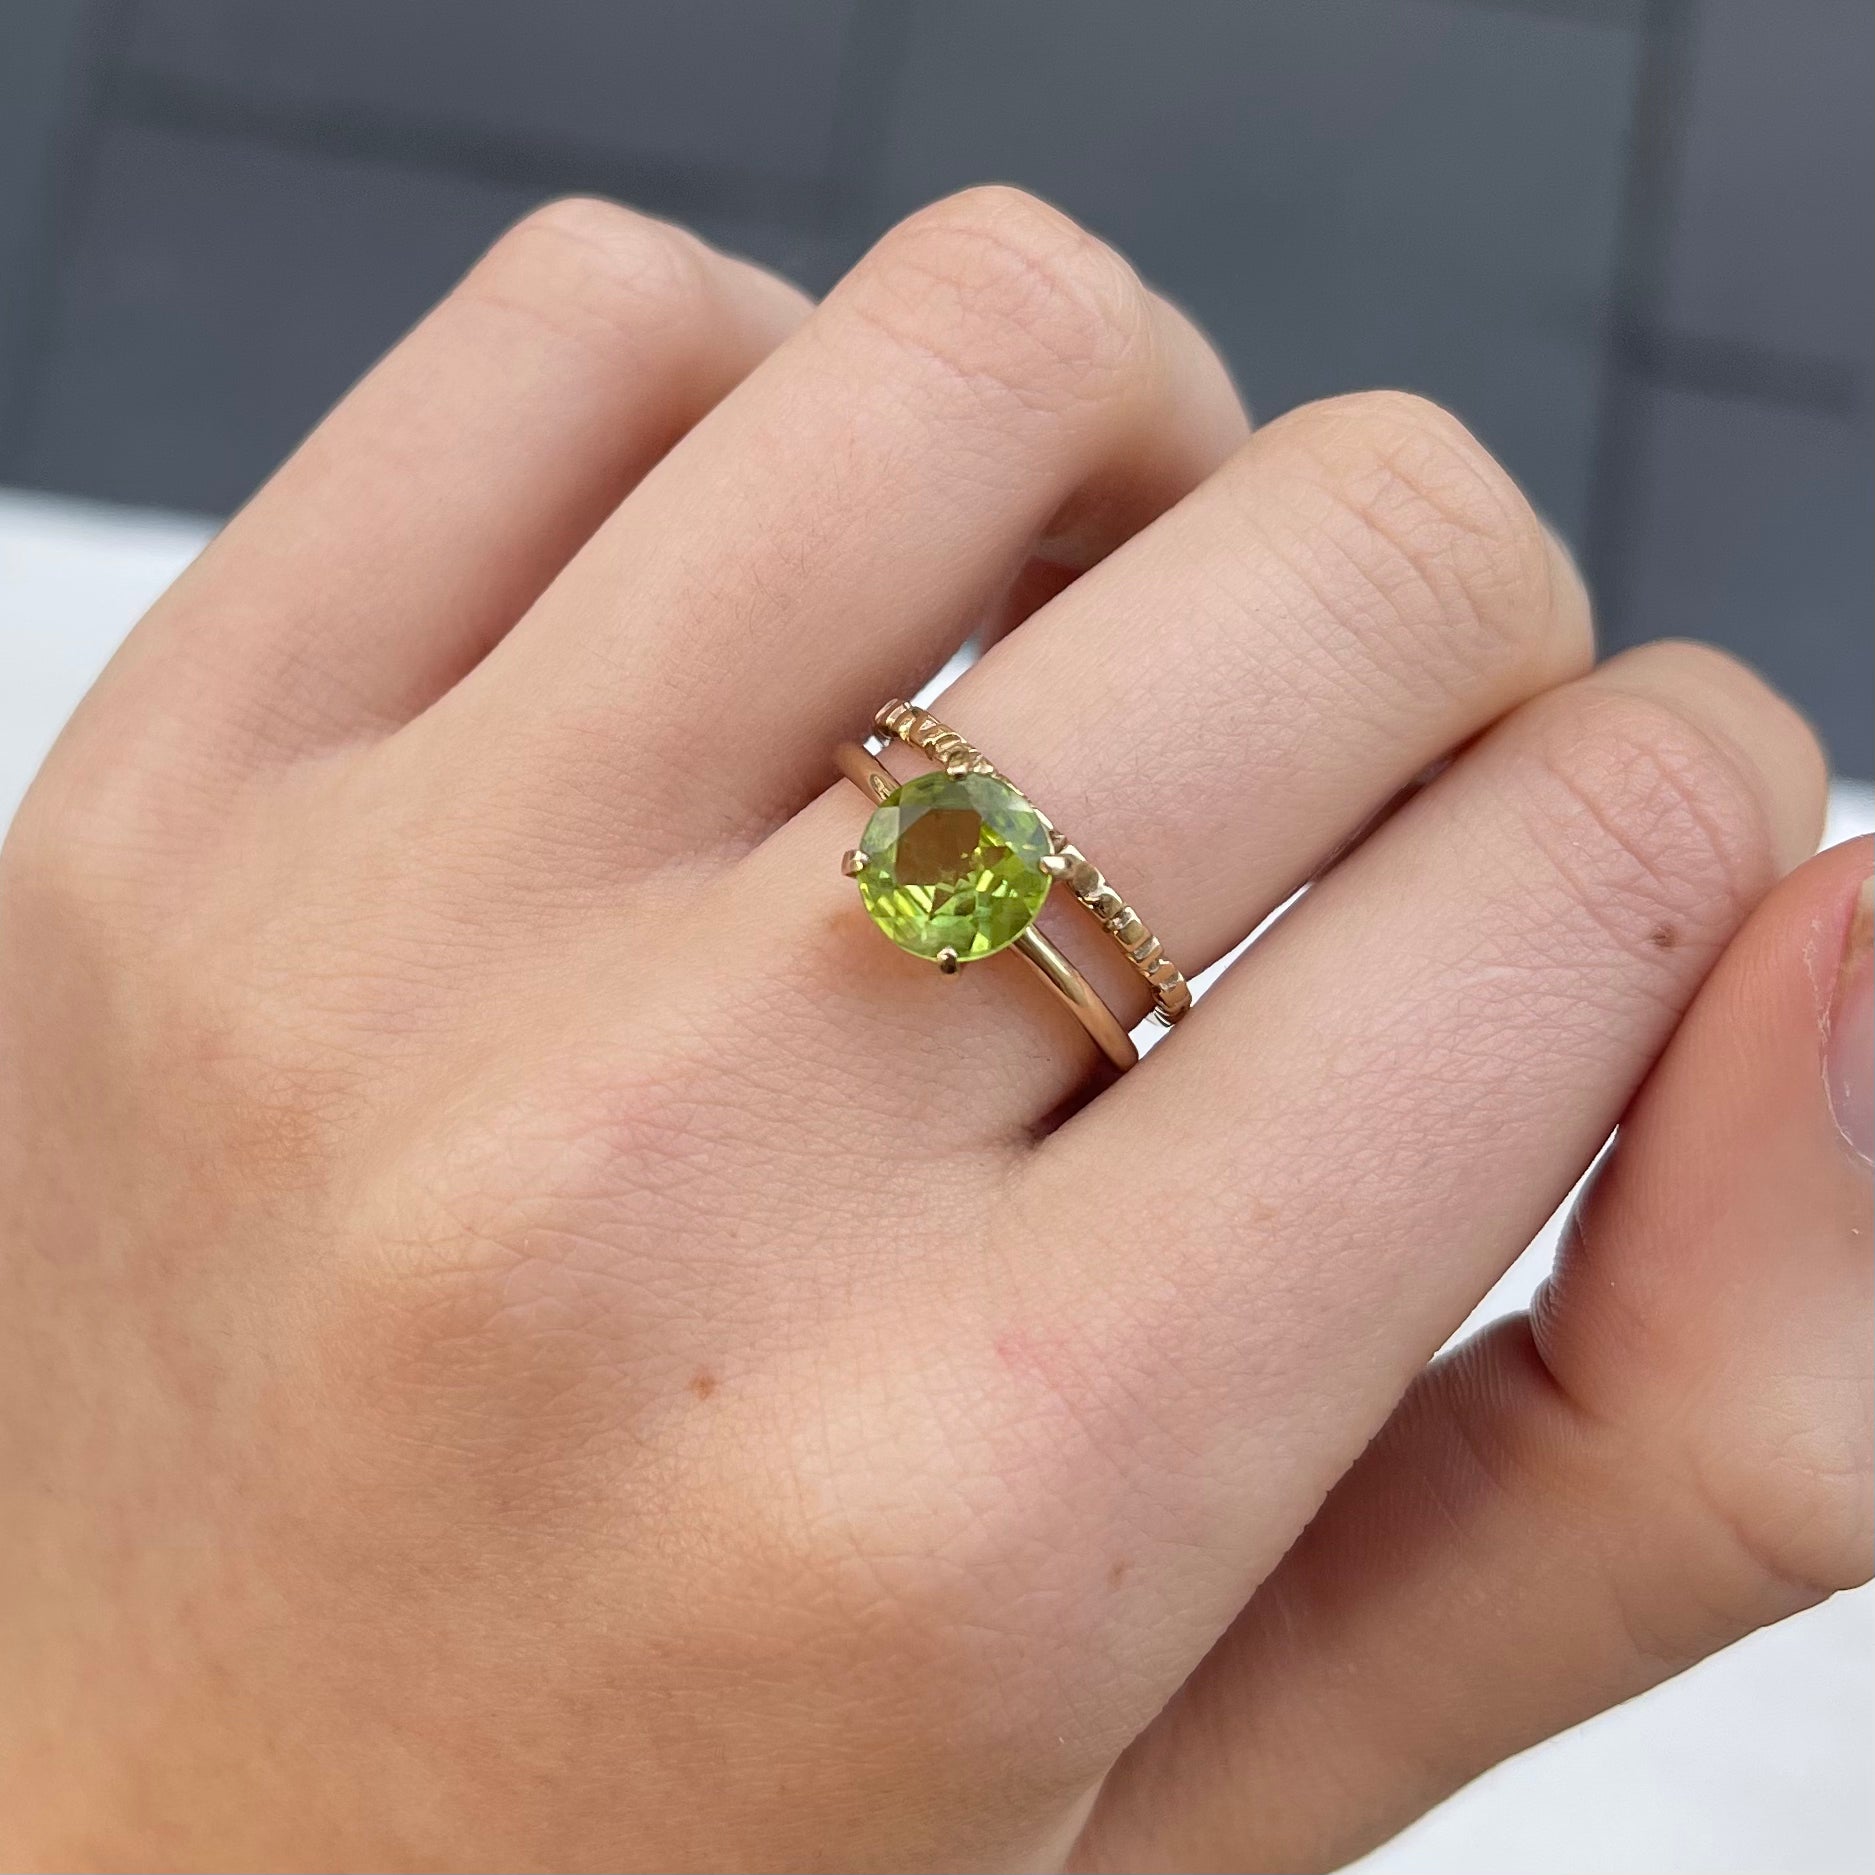 Solitaire Ring, Peridot, 9kt Yellow Gold